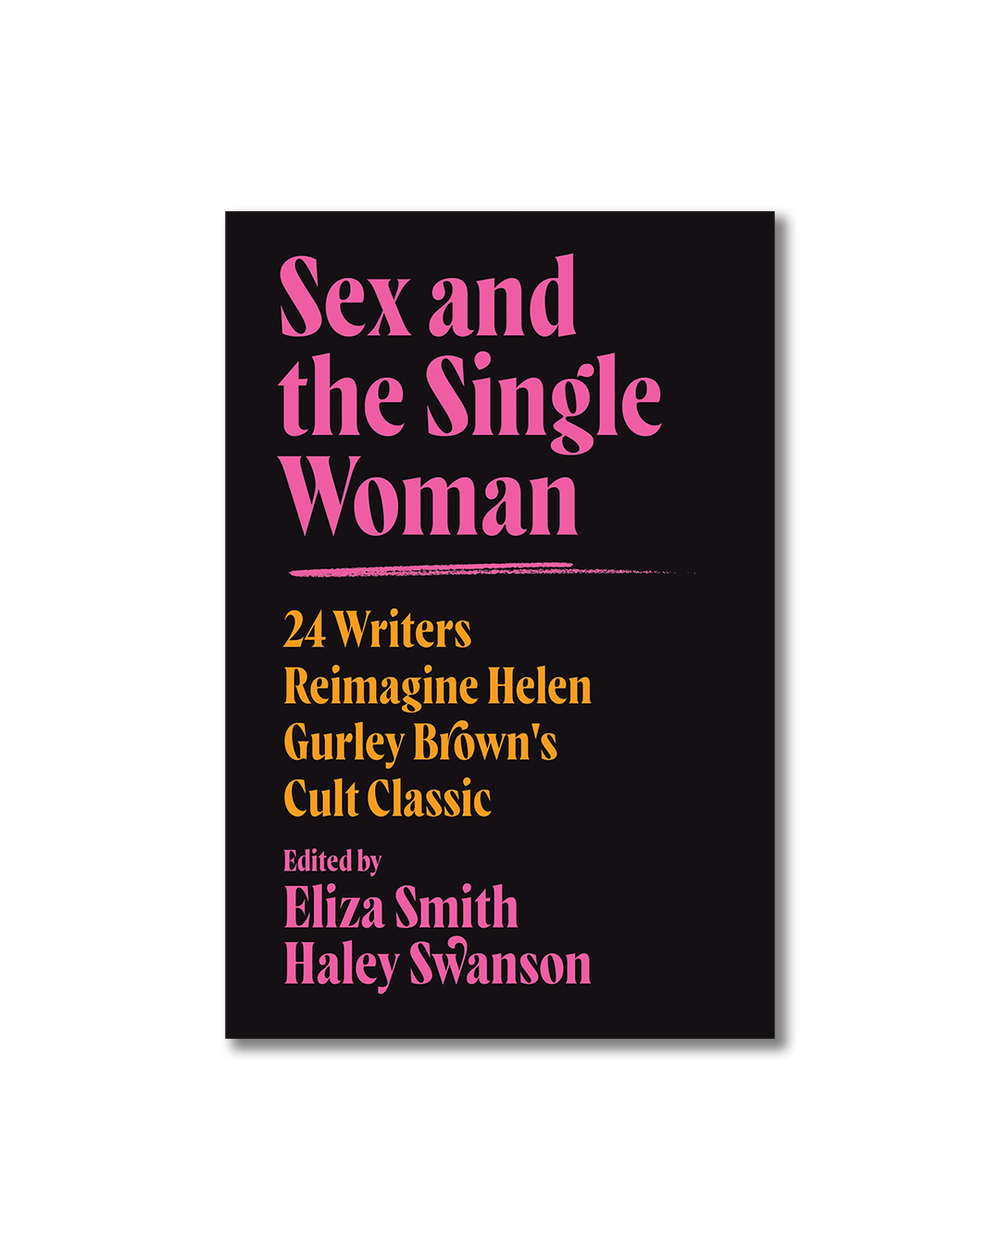 The Problem with Advice On “Sex and the Single Woman” — Cleveland Review of Books